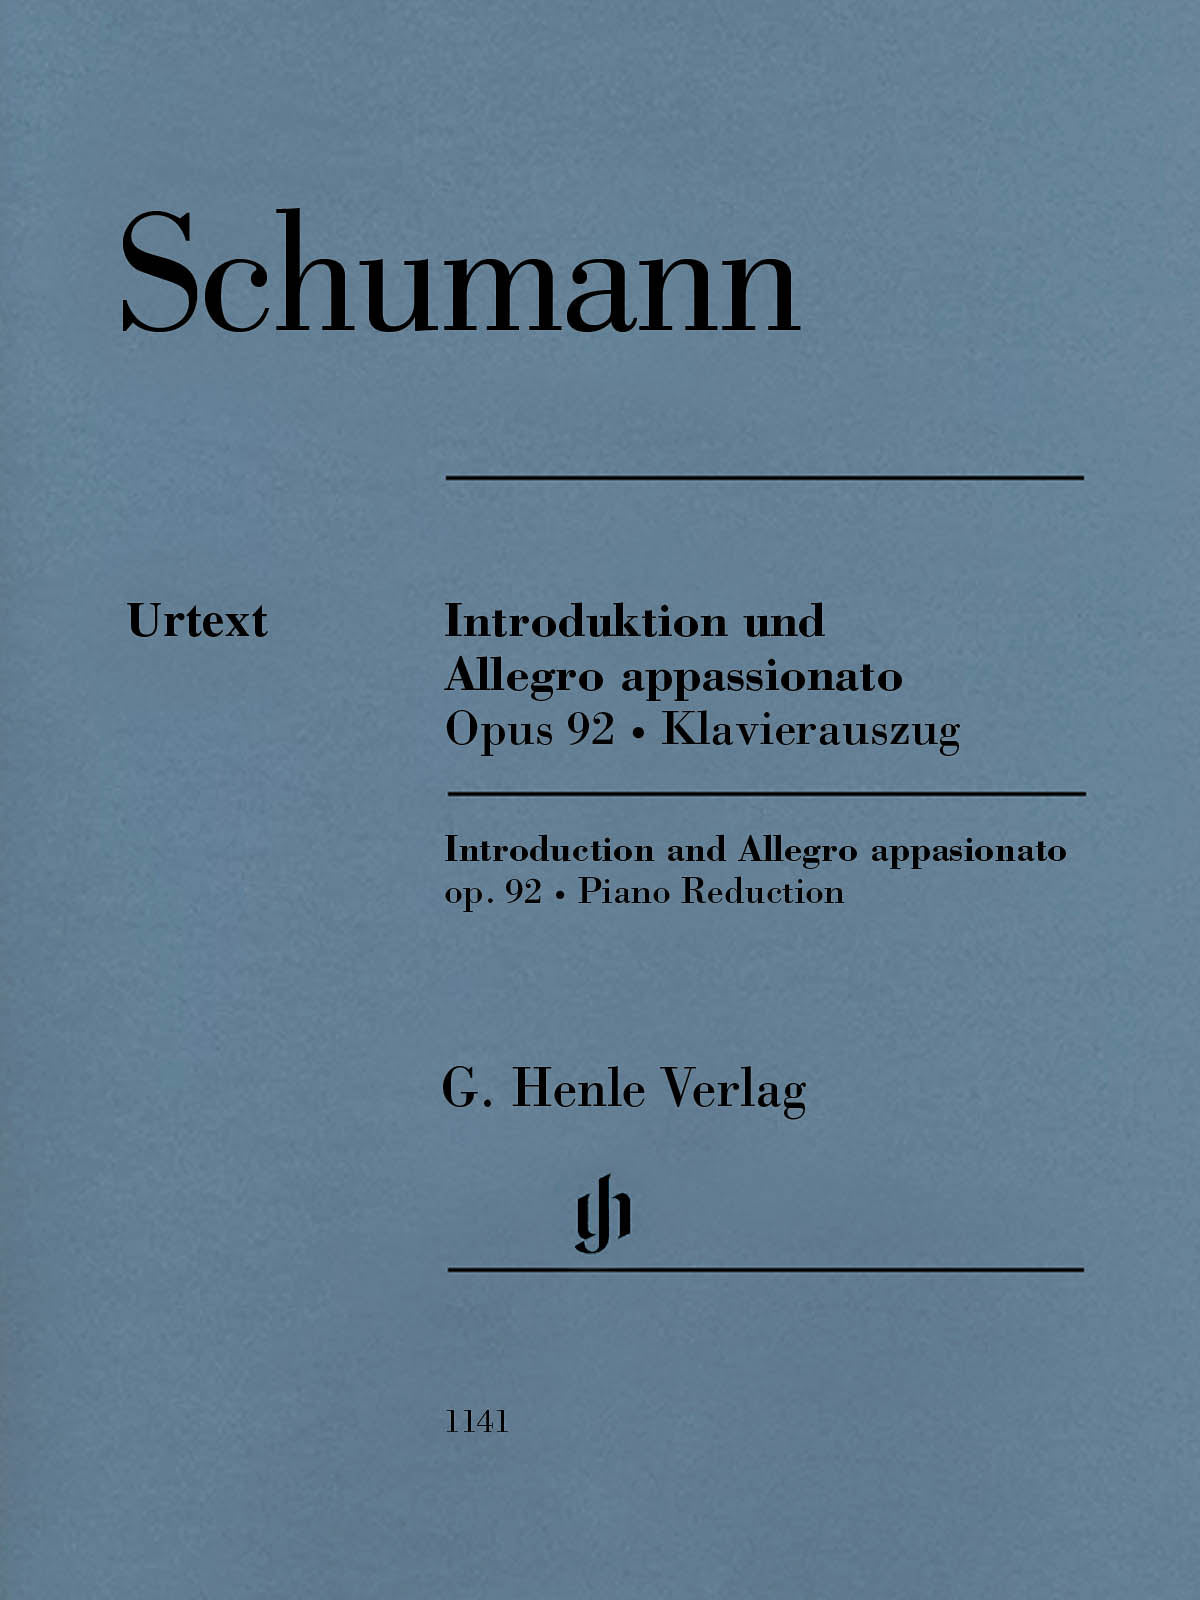 Schumann: Introduction and Allegro Appassionato, Op. 92